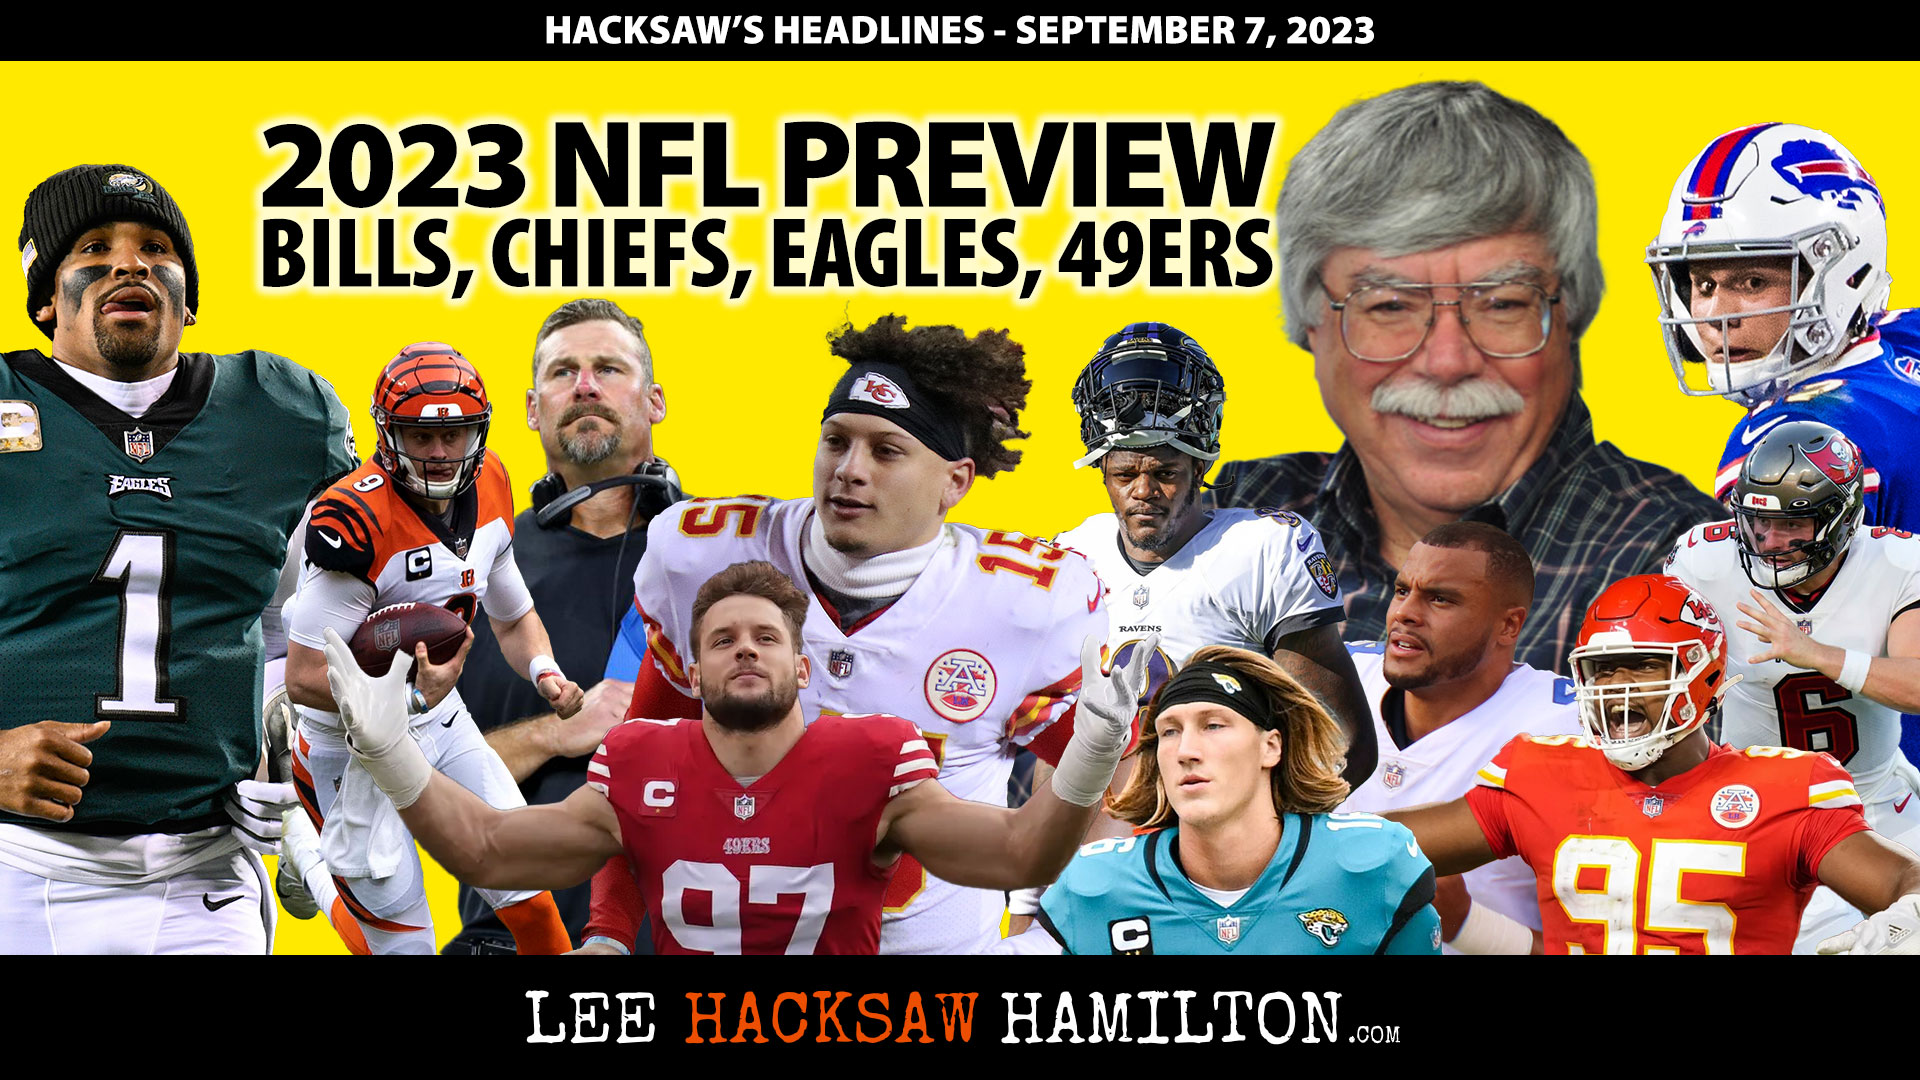 Lee Hacksaw Hamilton discusses 2023 NFL Preview, Division by Division